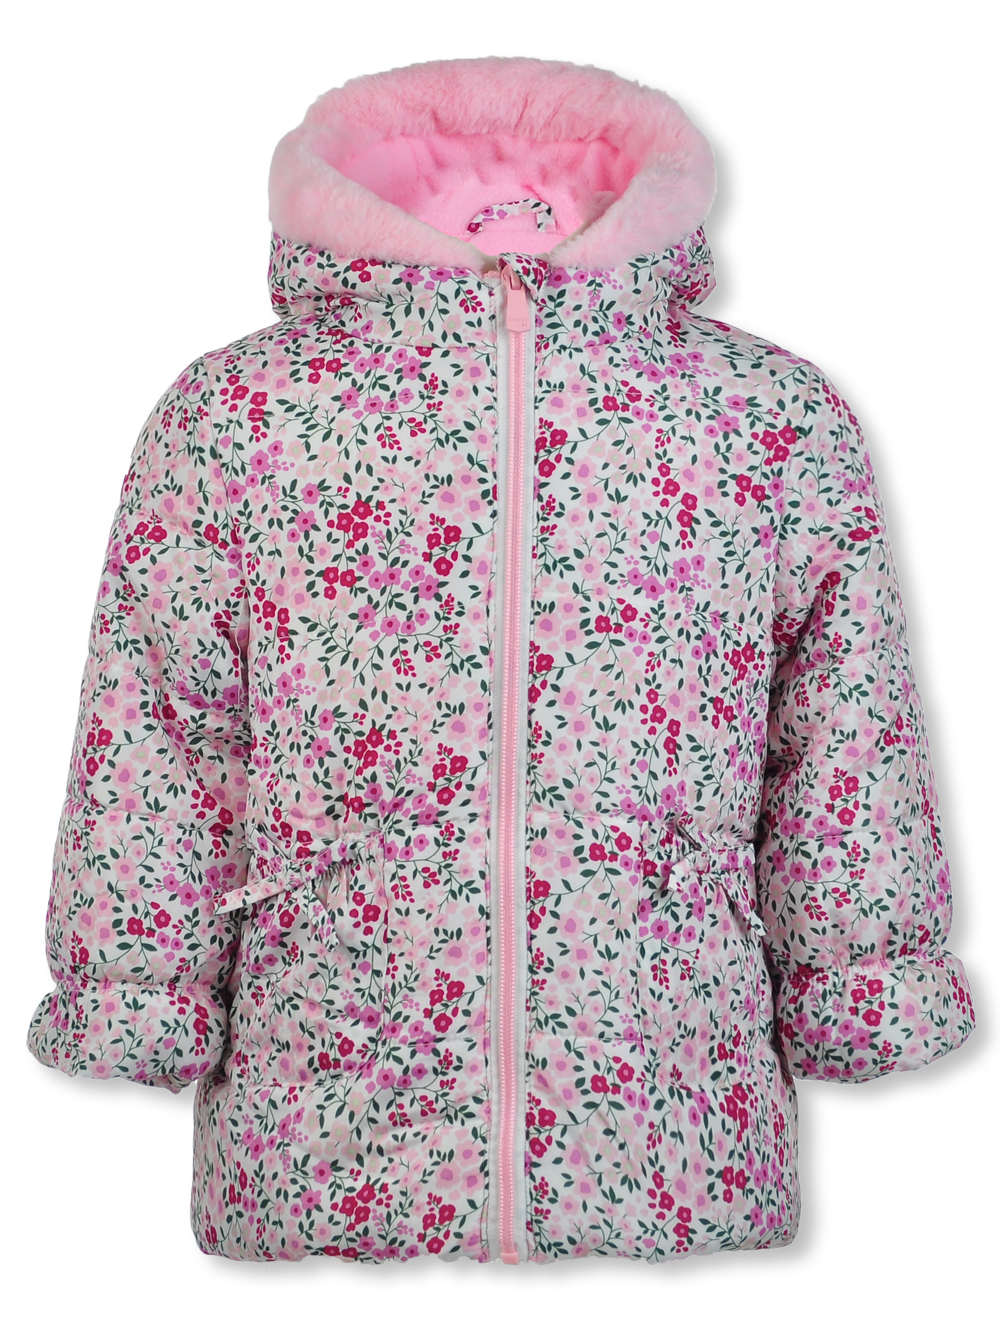 LIV OUTDOOR Clearance Girls' Jackets: Average savings of 65% at Sierra